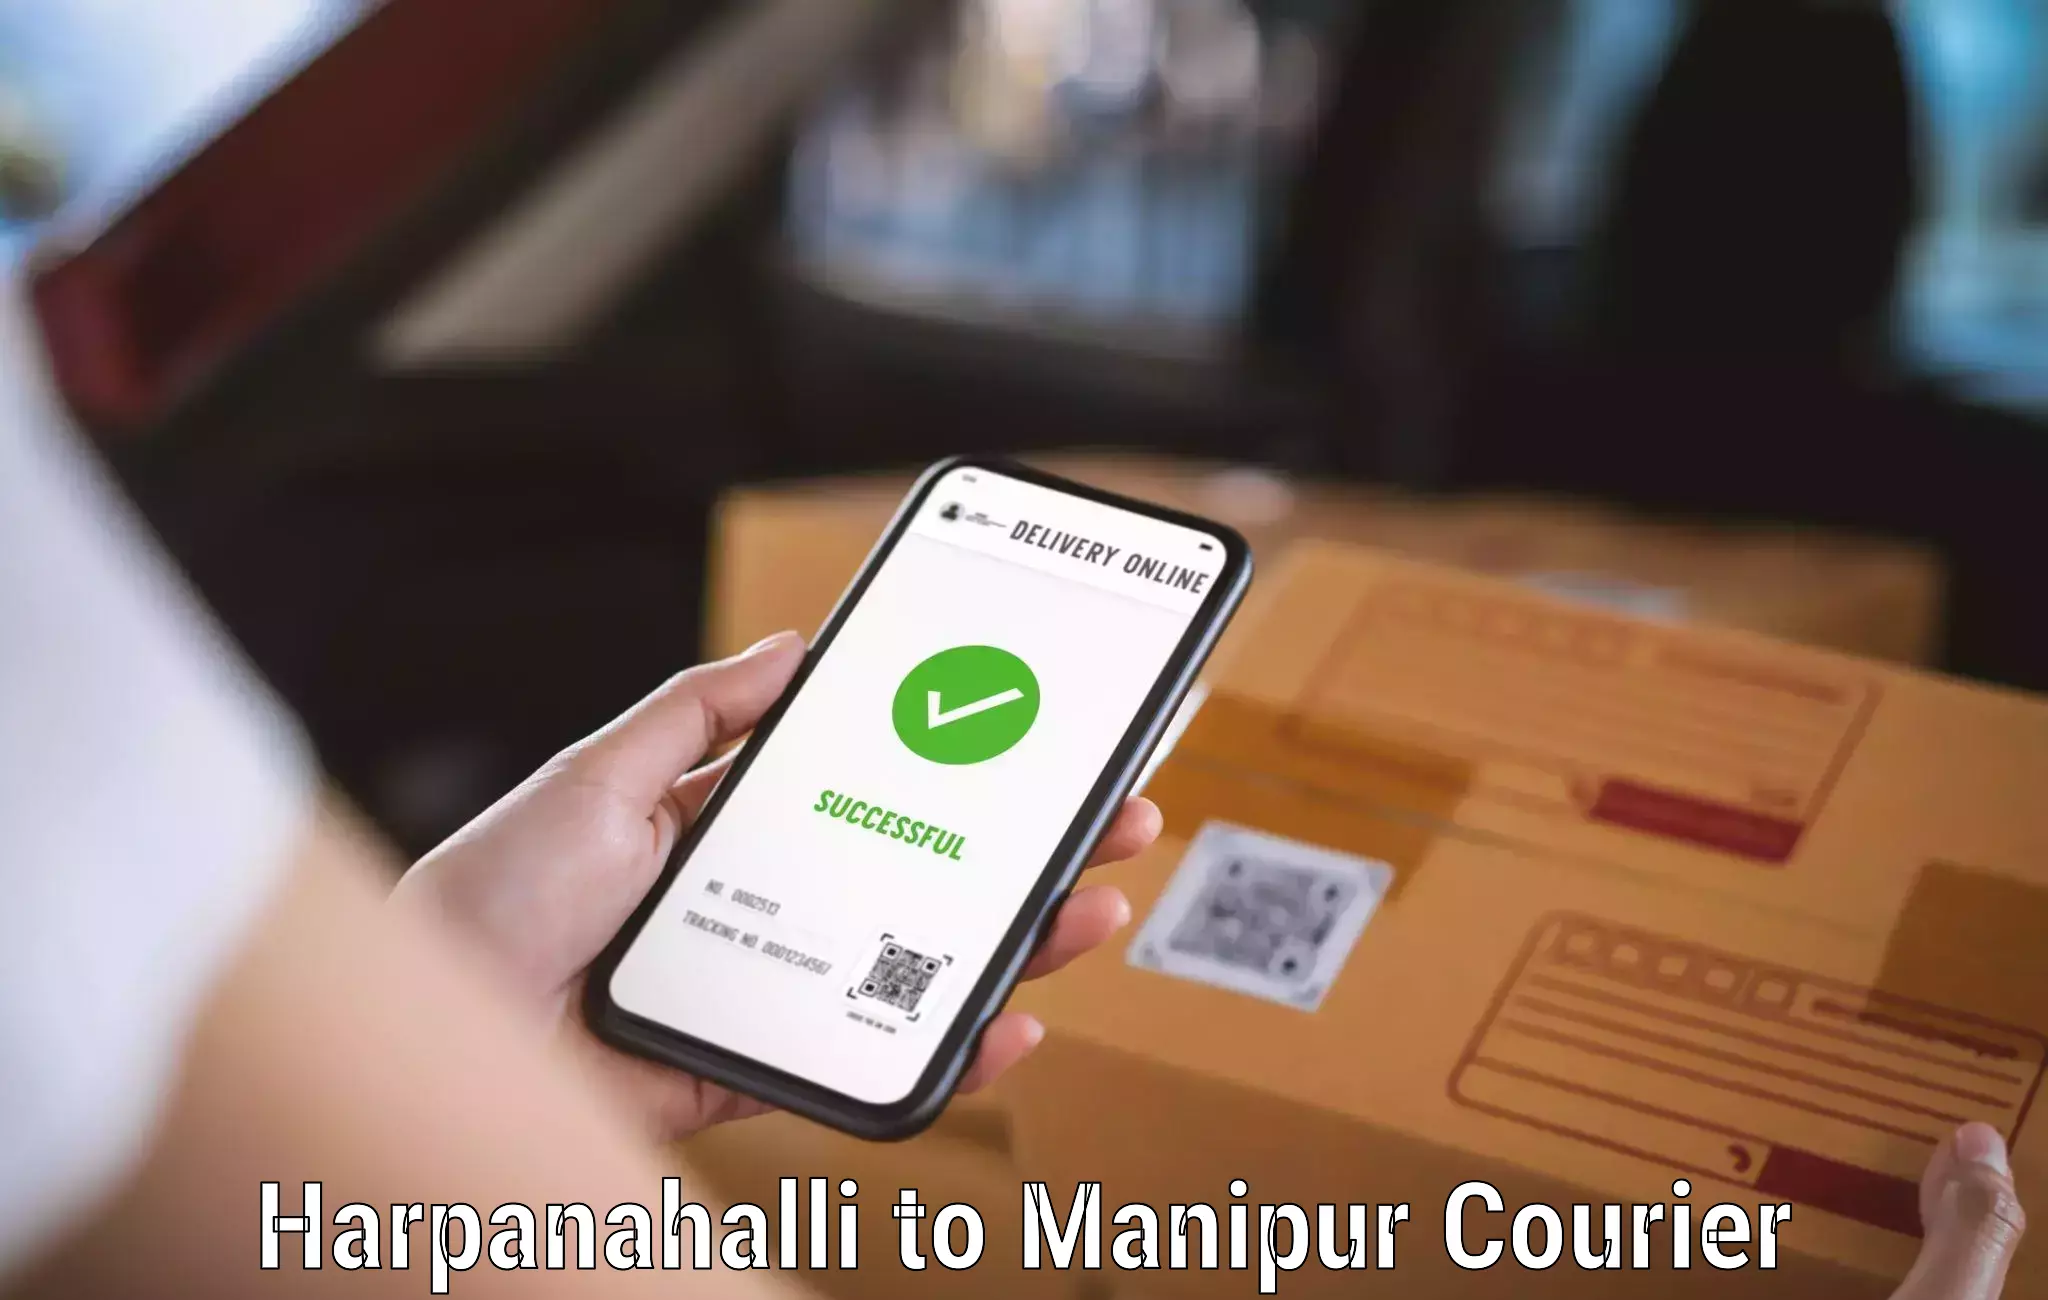 Business delivery service Harpanahalli to Kanti